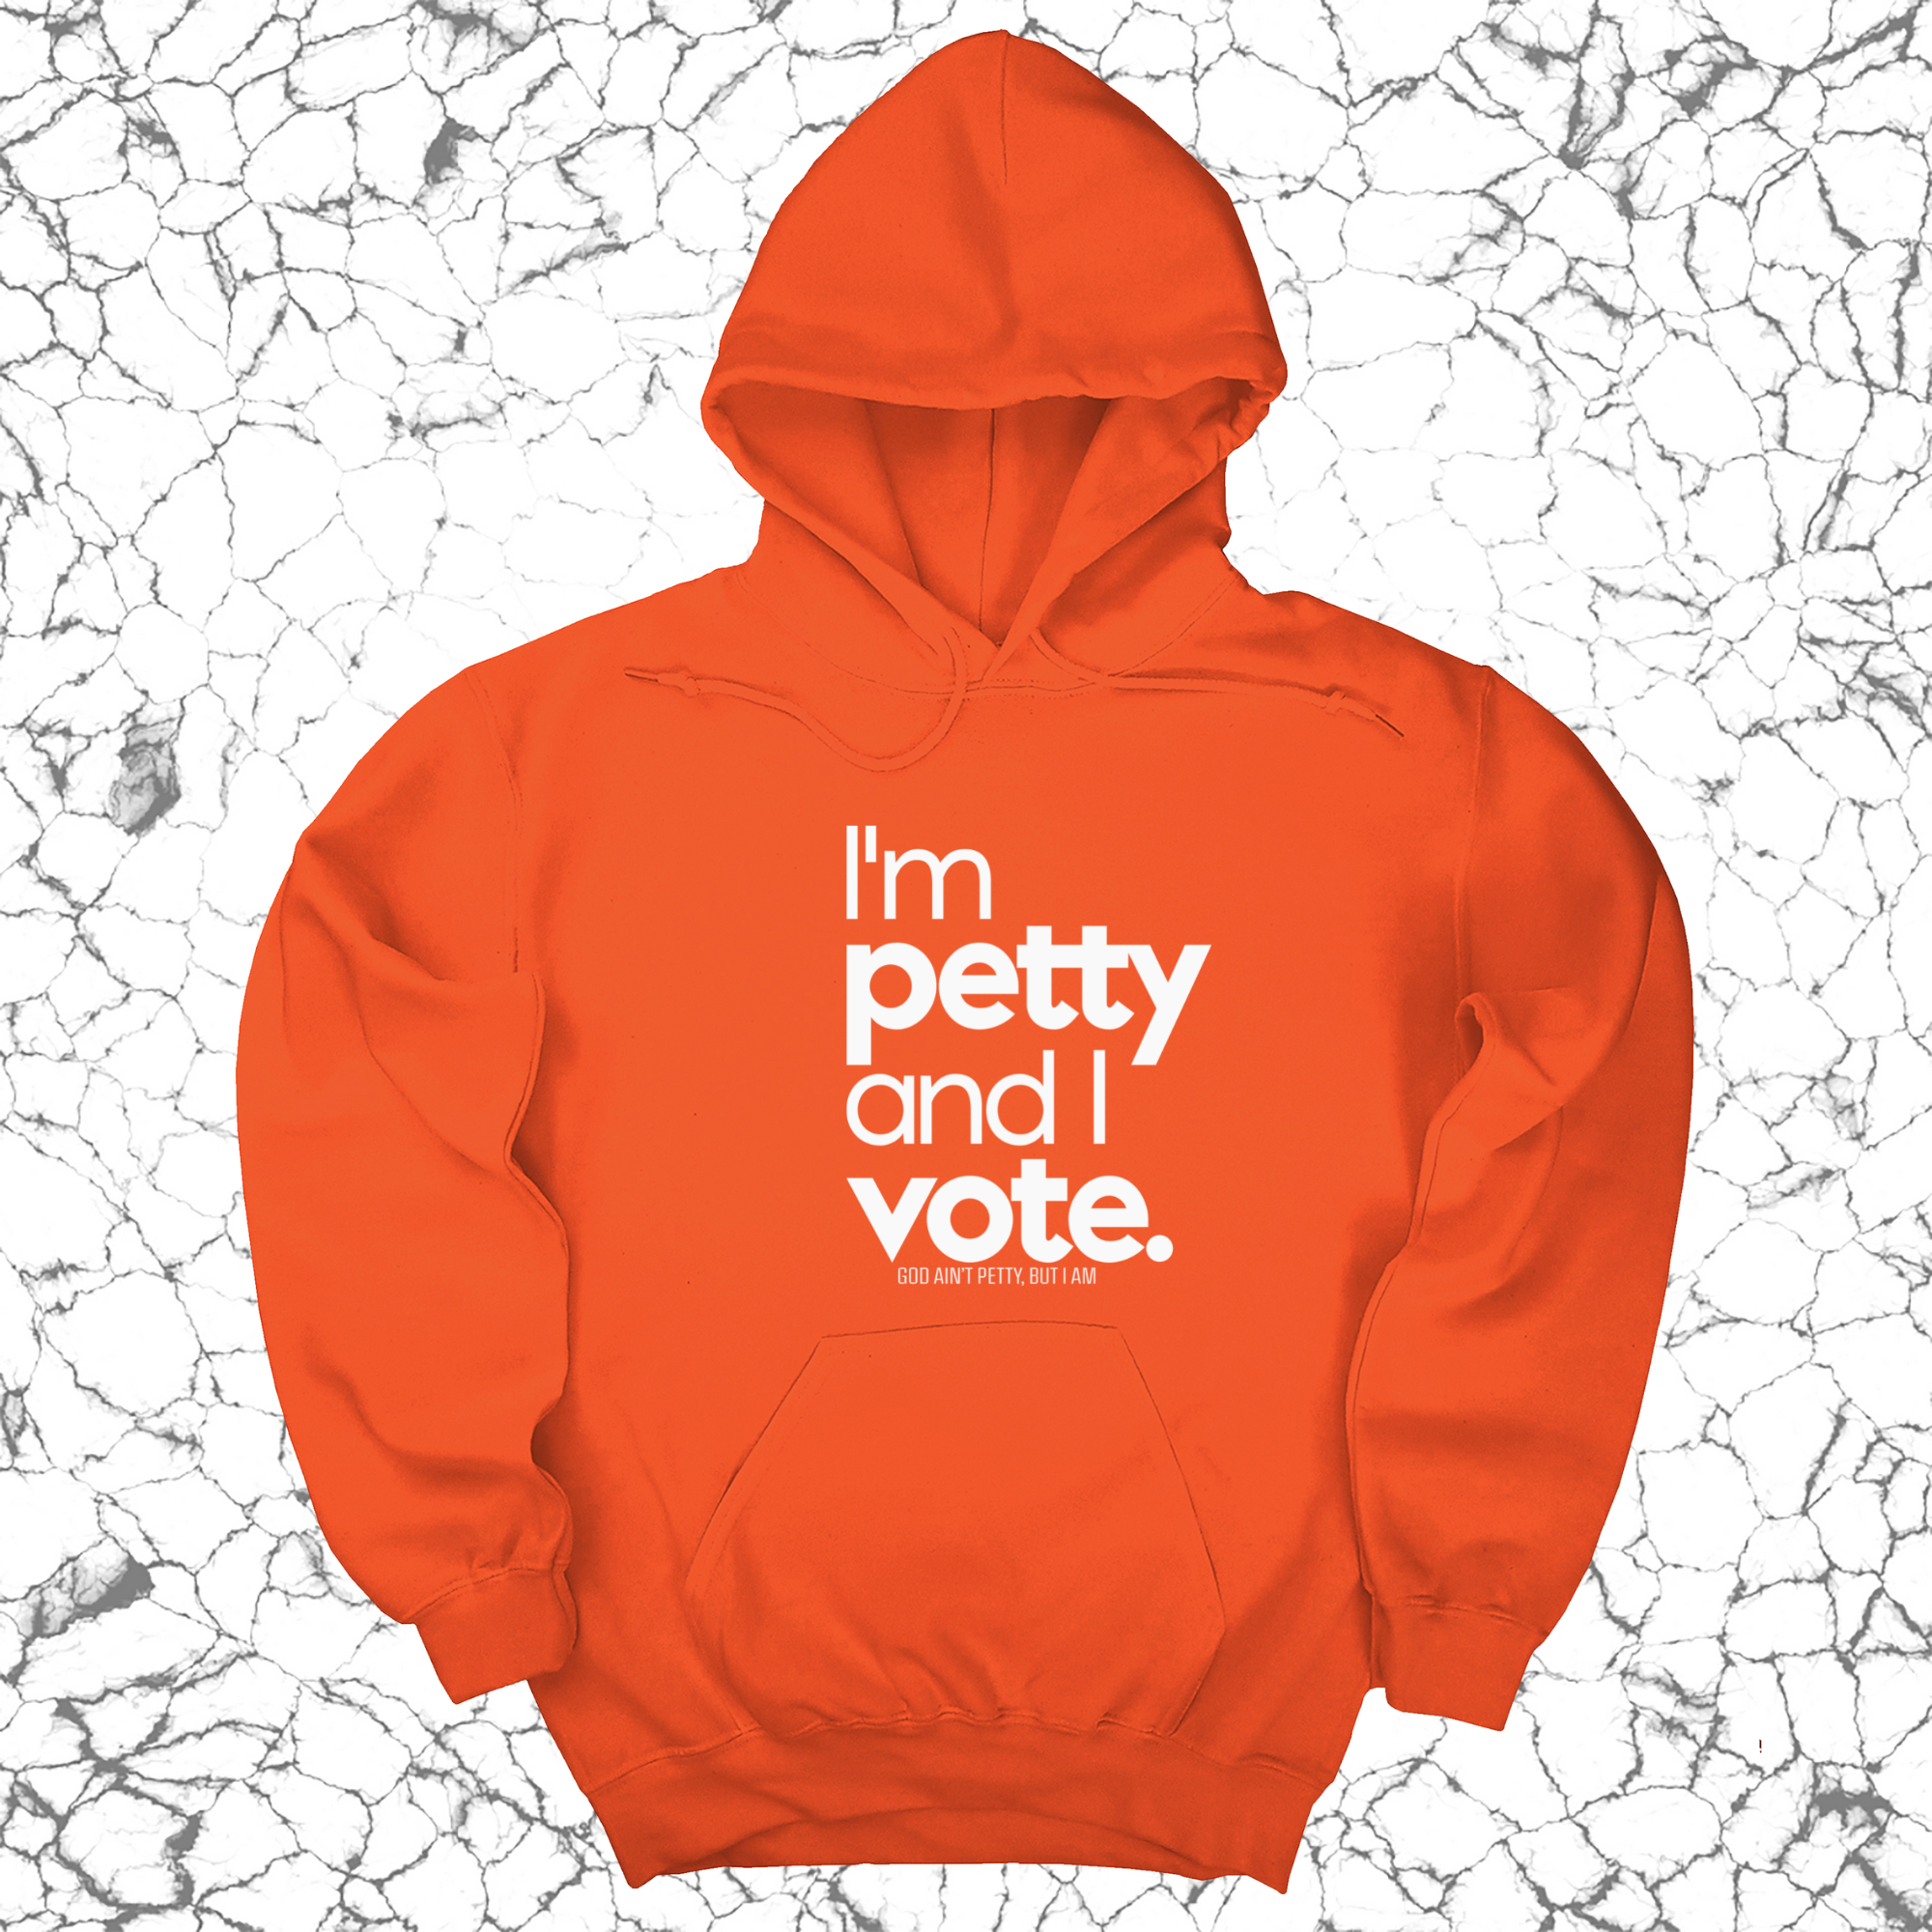 I'm petty and I vote Unisex Hoodie-Hoodie-The Original God Ain't Petty But I Am